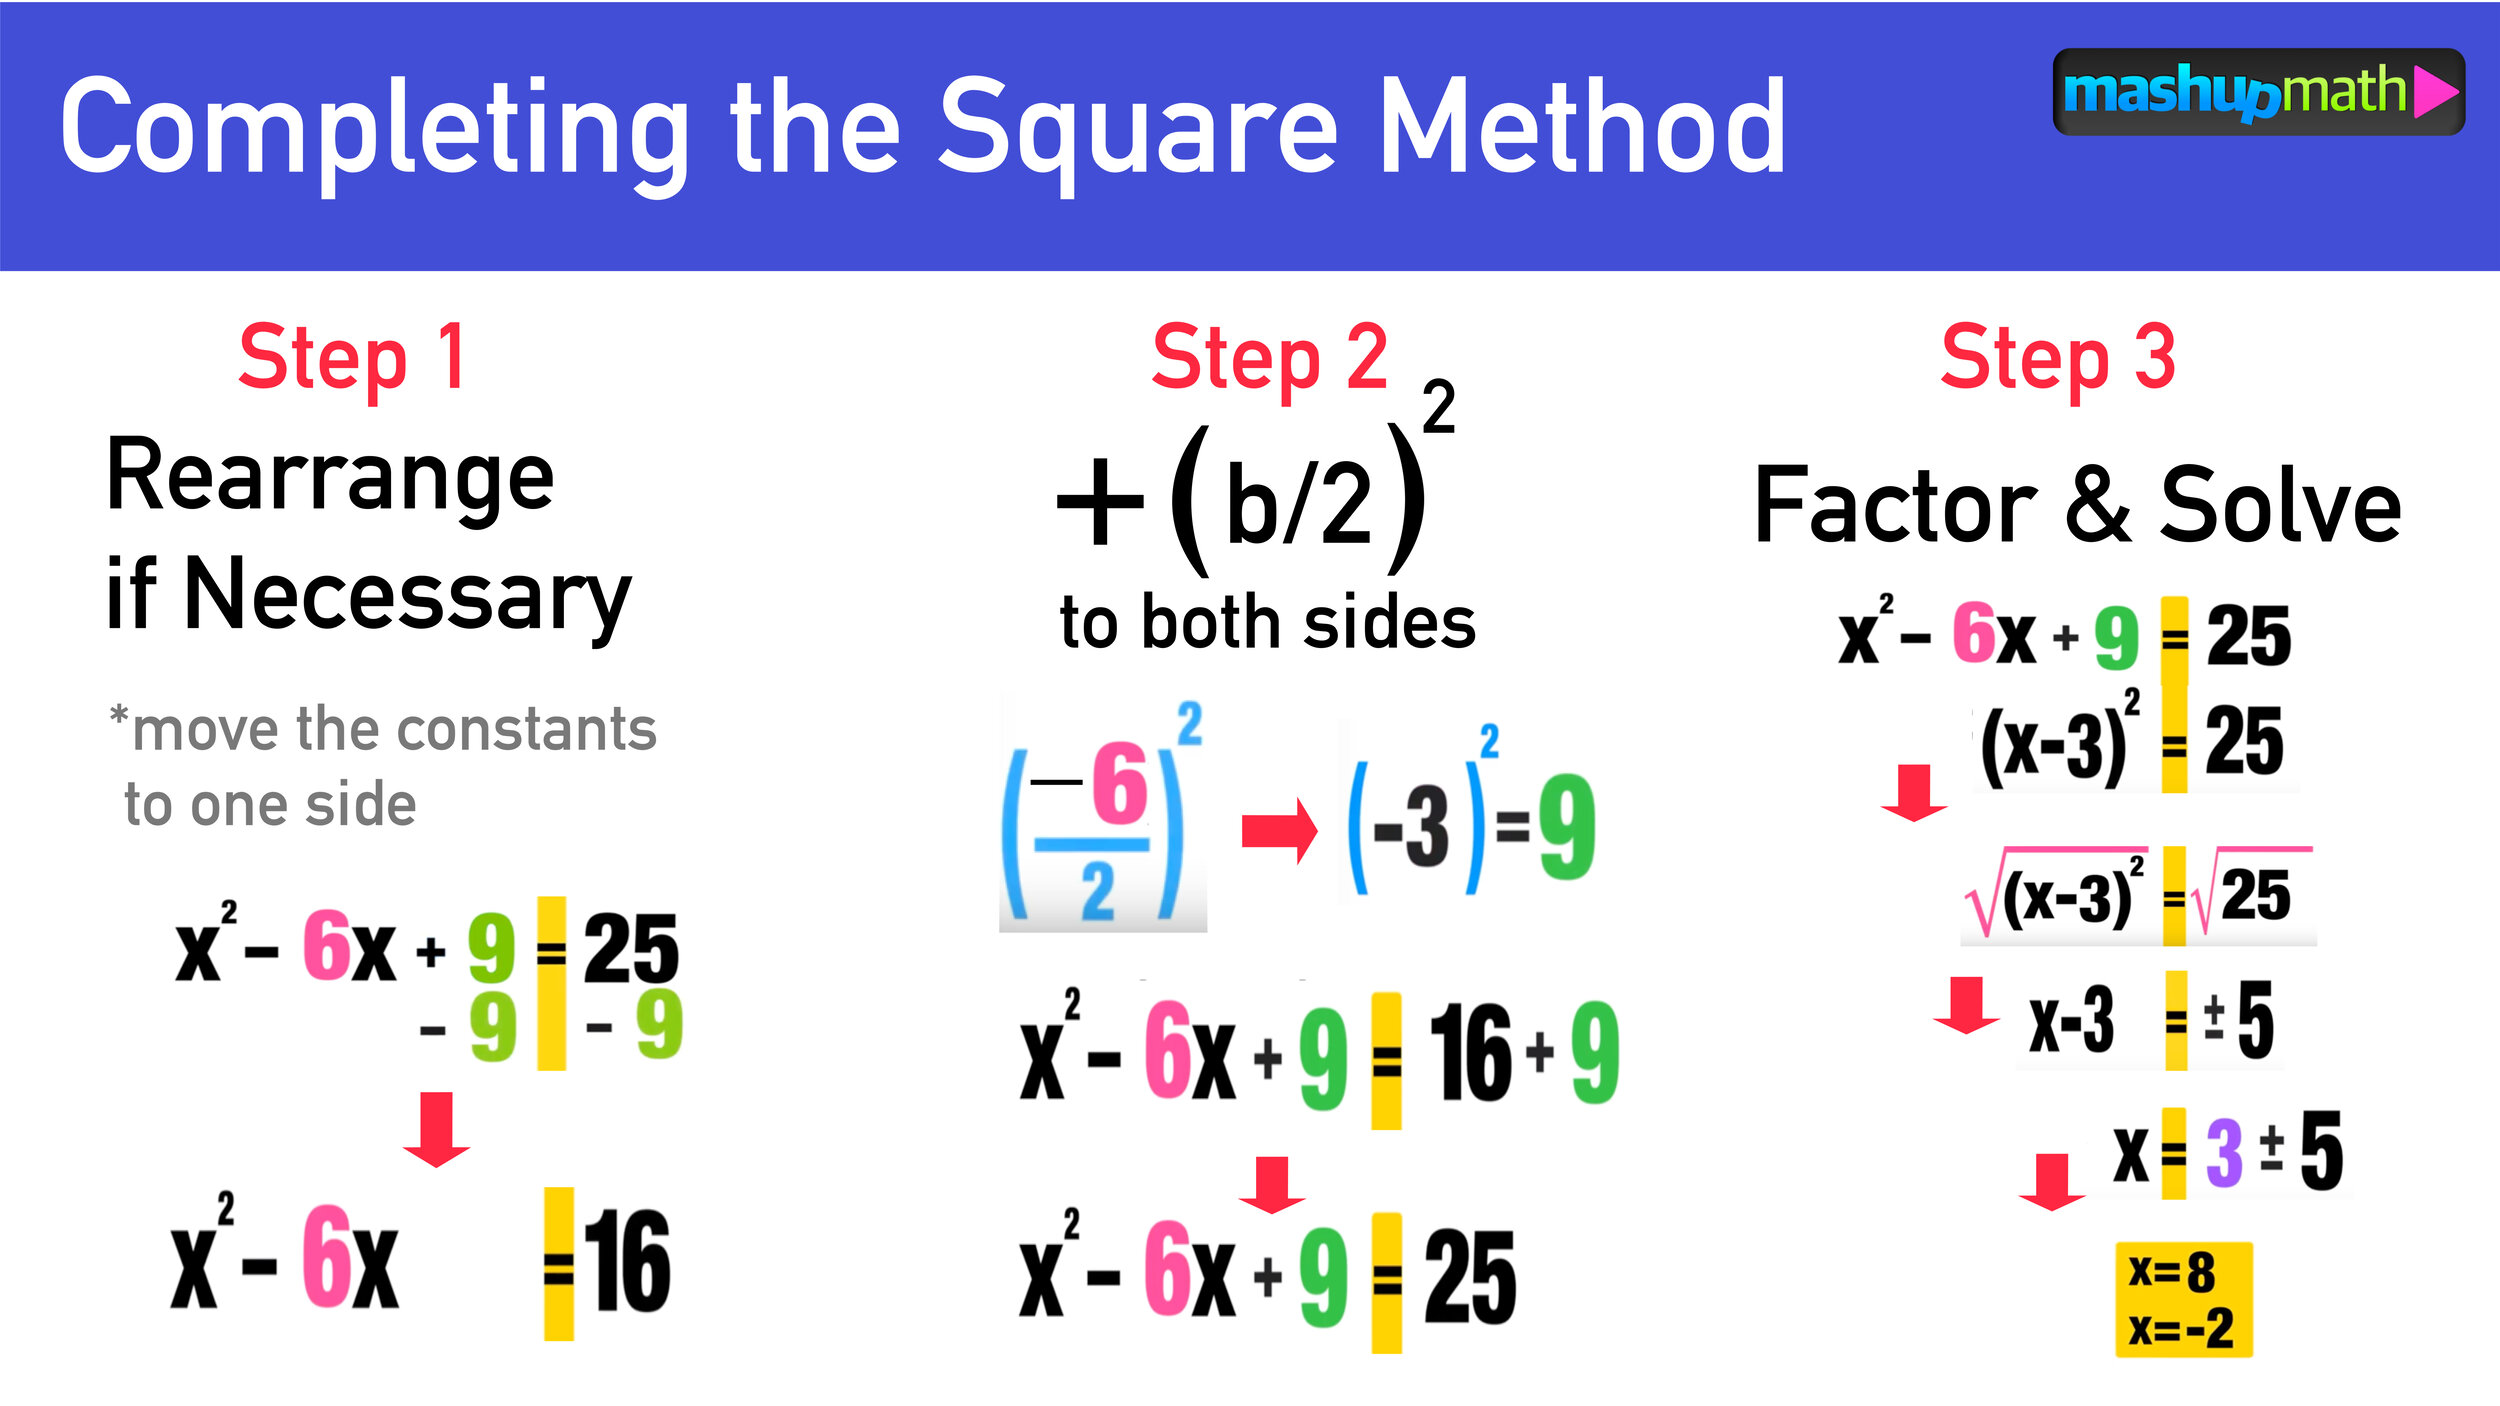 practice problems for solving quadratic equations by completing the square